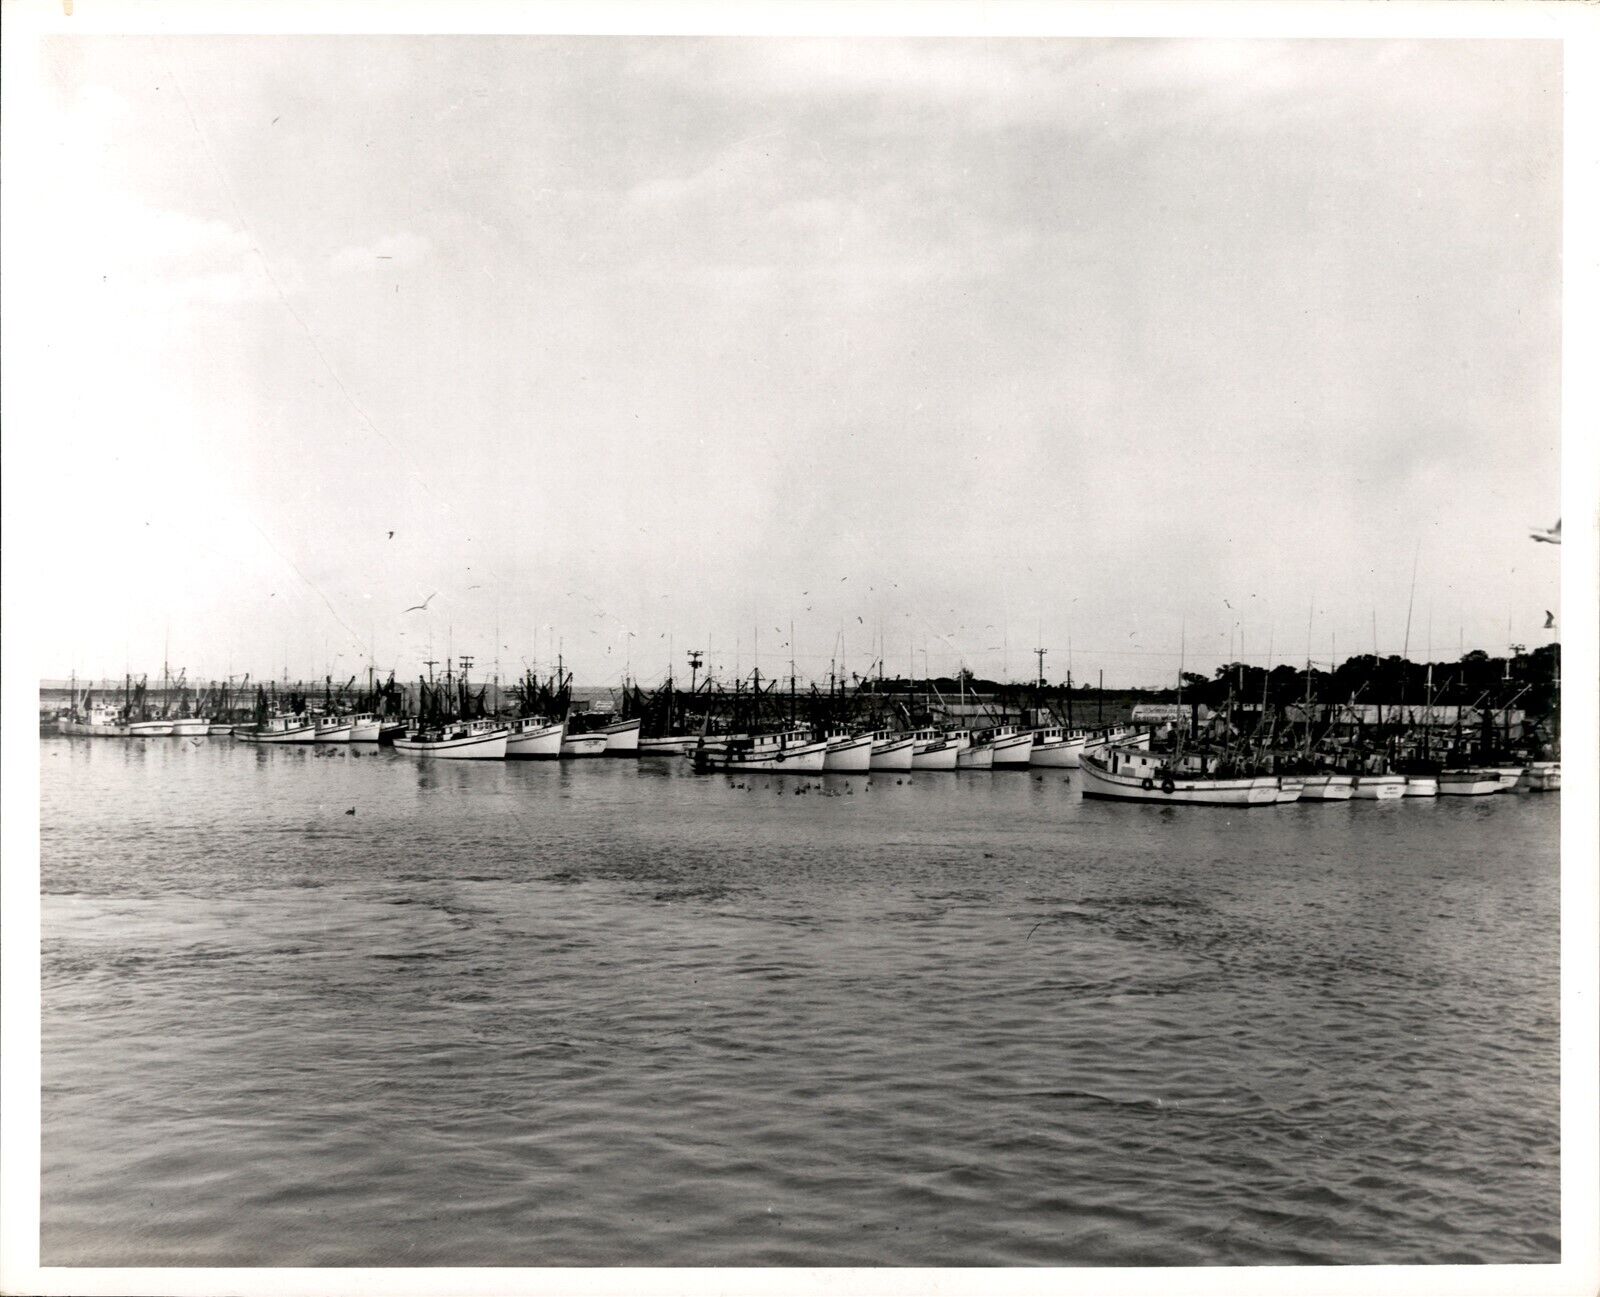 LG13 Original Photo COCOA FLORIDA Ships Lined up Docked Peaceful Ocean Water